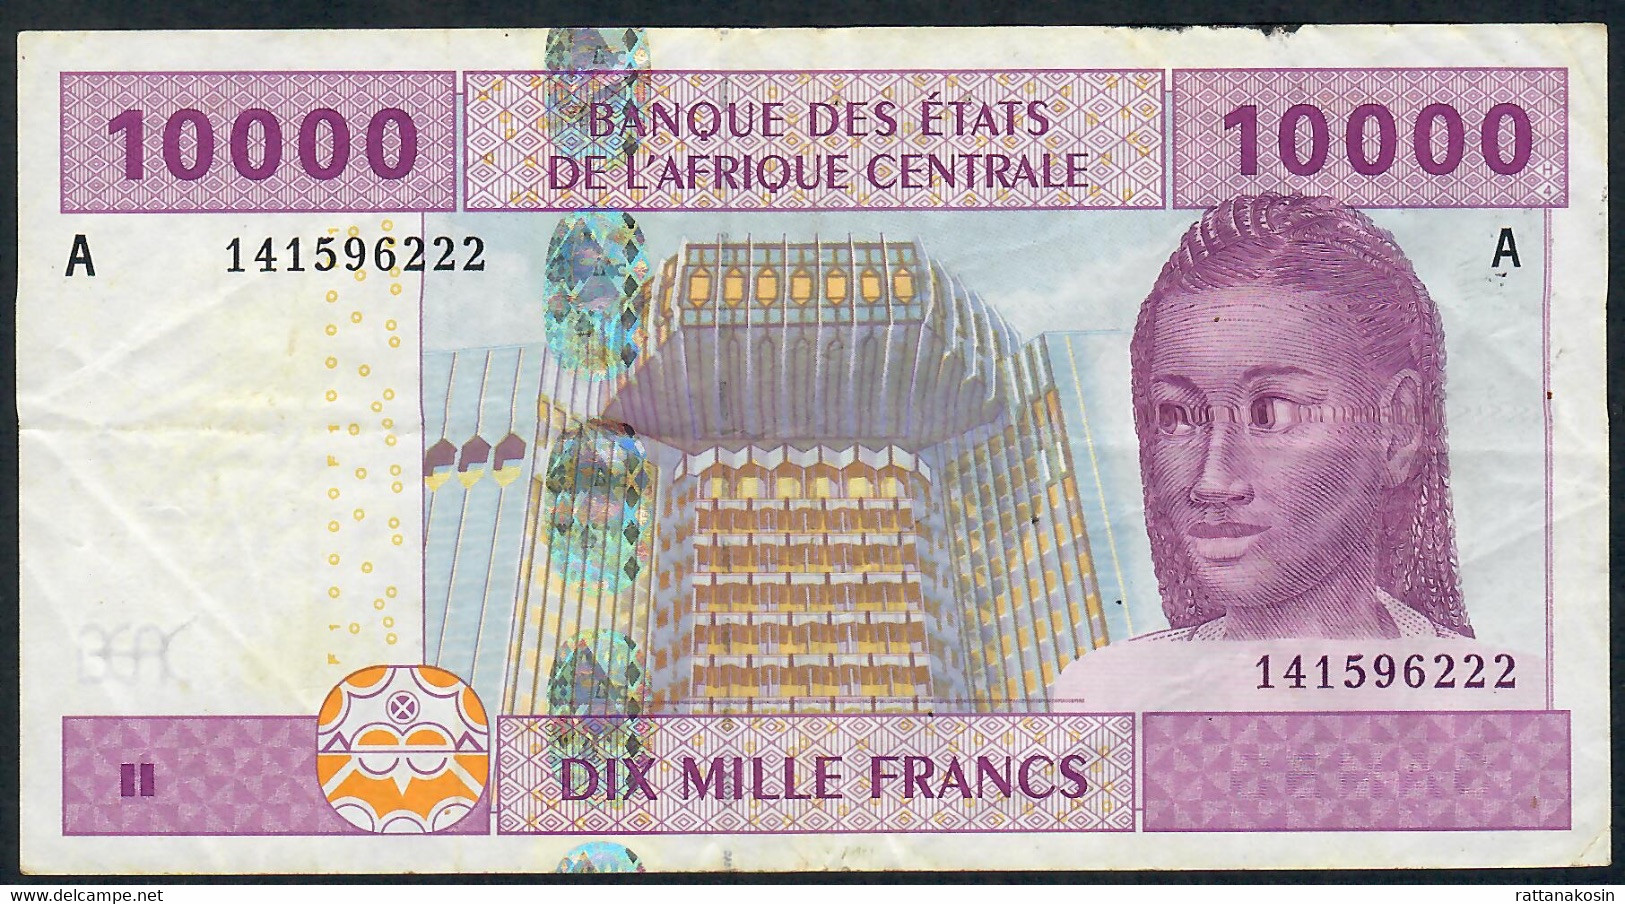 C.A.S. LETTER A = GABON P410Aa 10000 Or 10.000 FRANCS 2002 Signature 5 FIRST SIGNATURE   VF NO P.h. - Zentralafrikanische Staaten